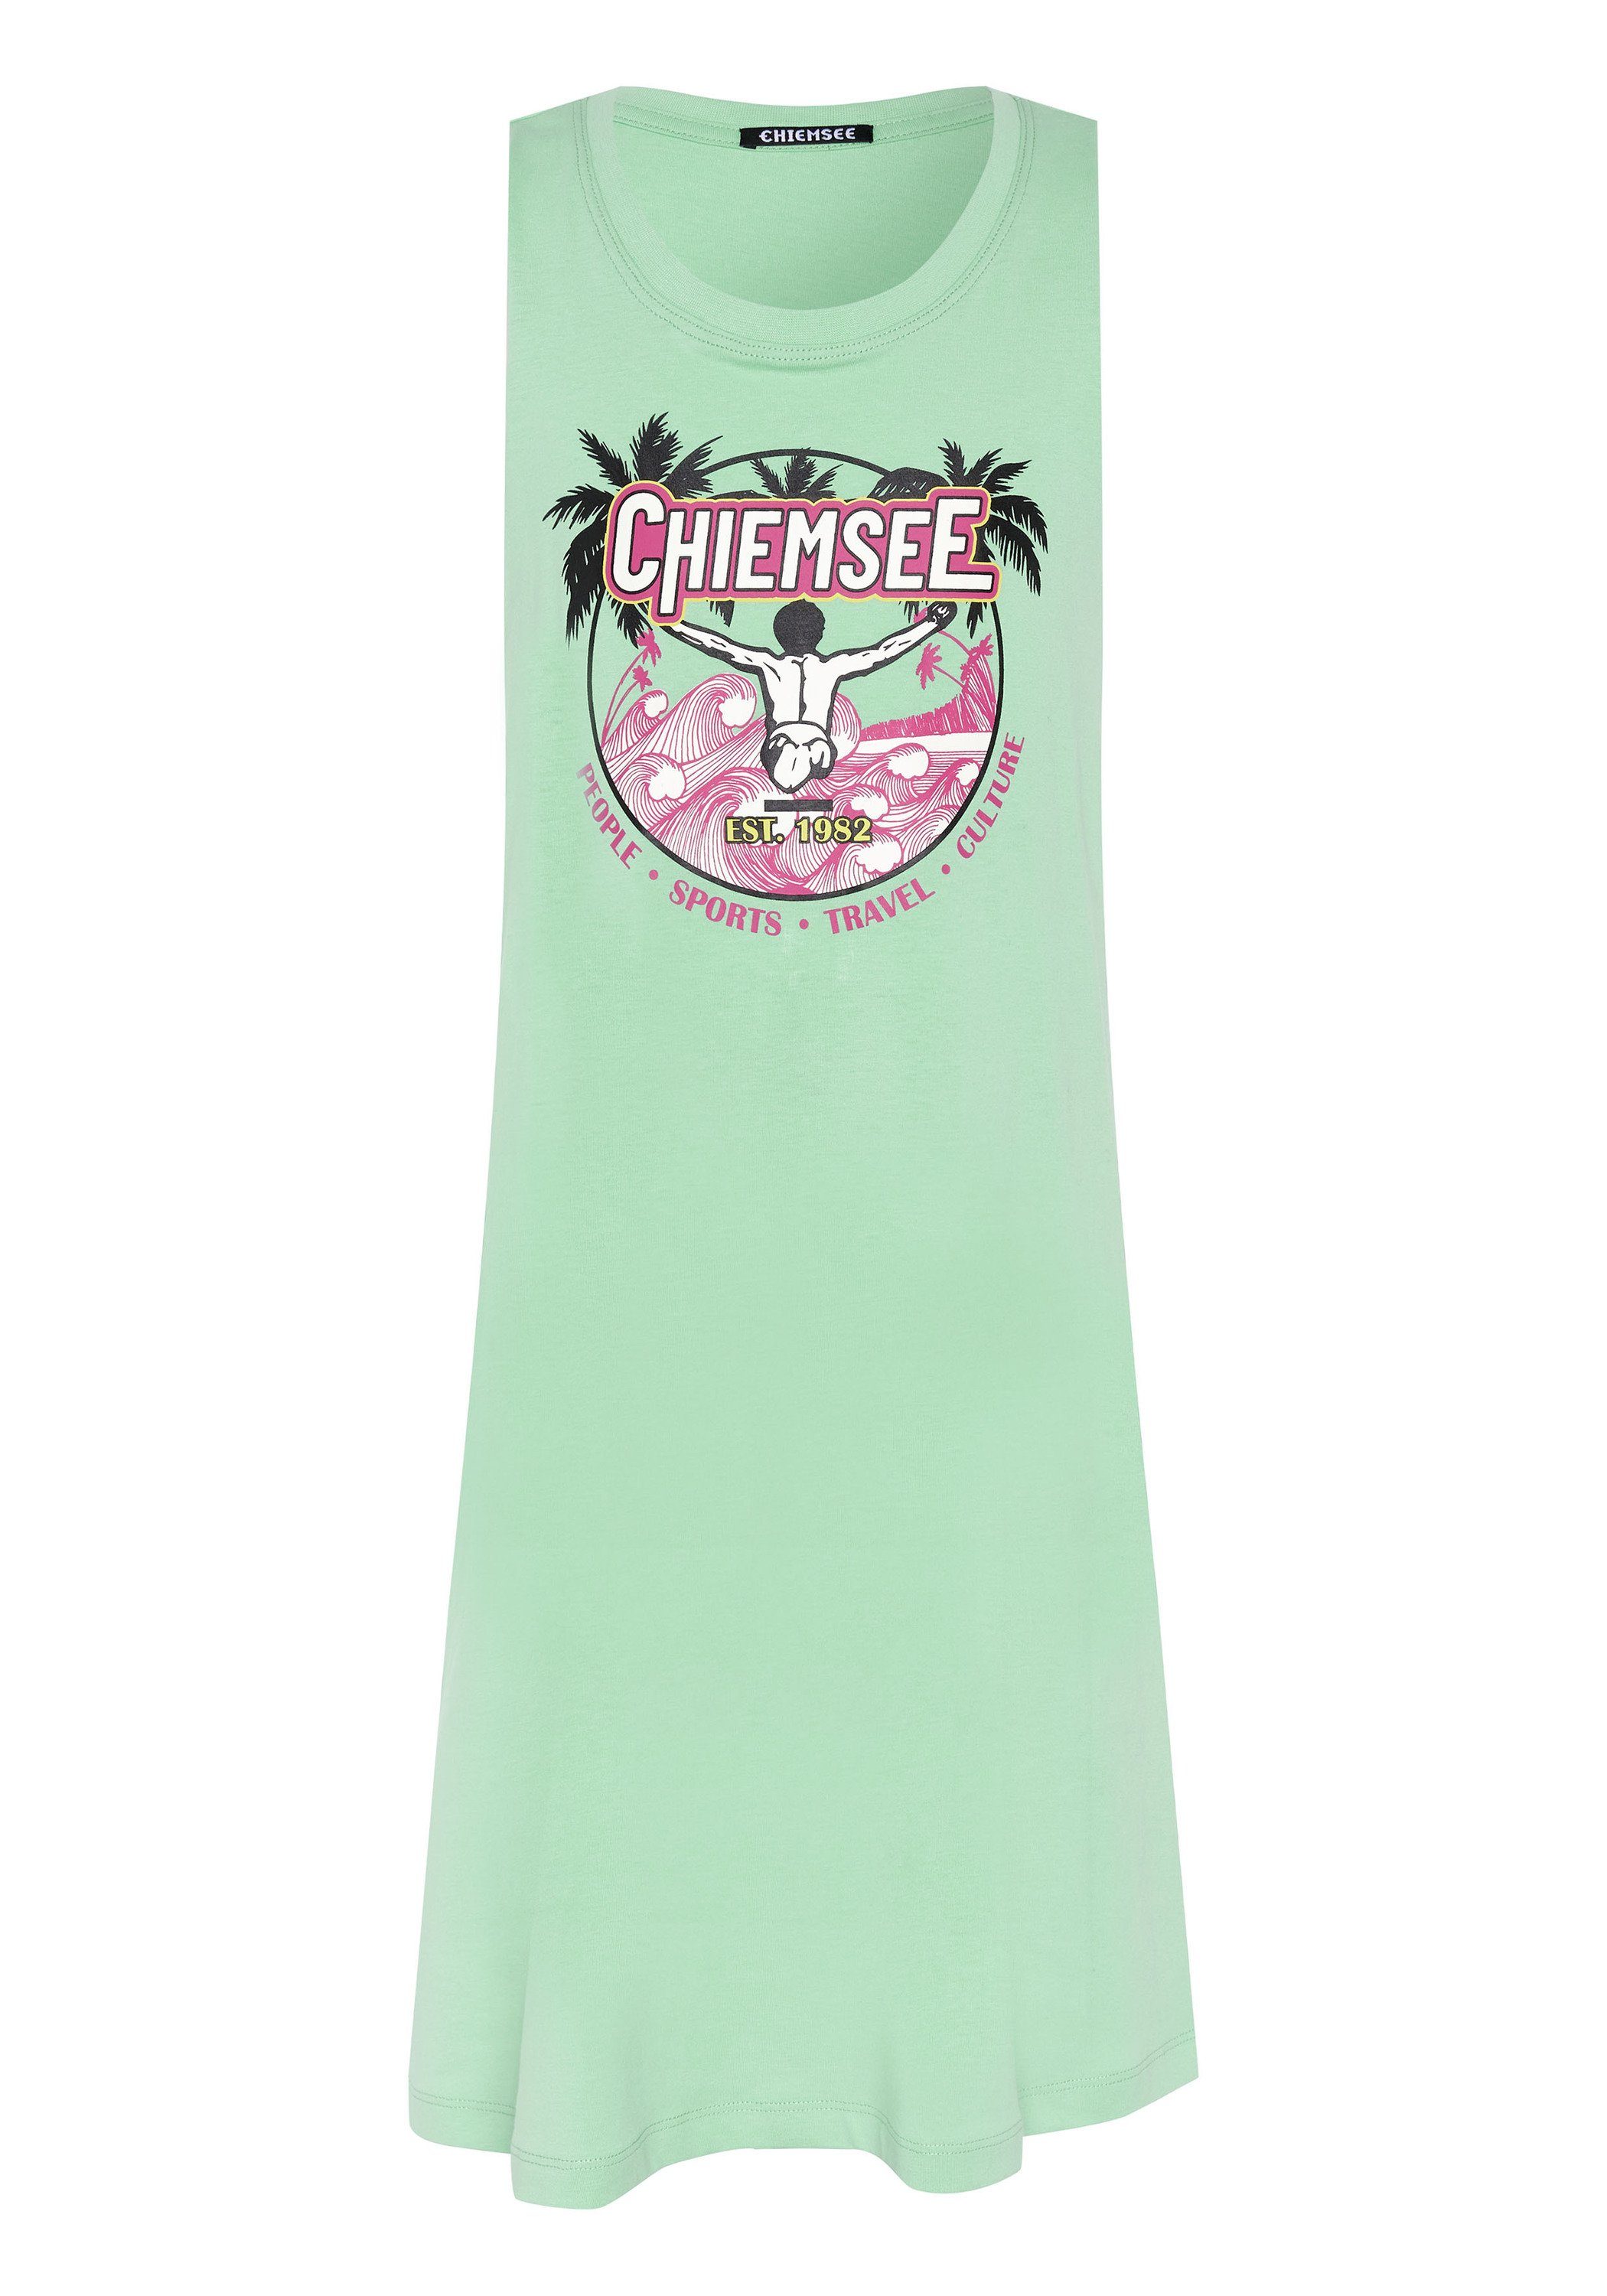 und Labelprint Longtop mit Tanktop Neptune Green 1 Chiemsee Cut-Out